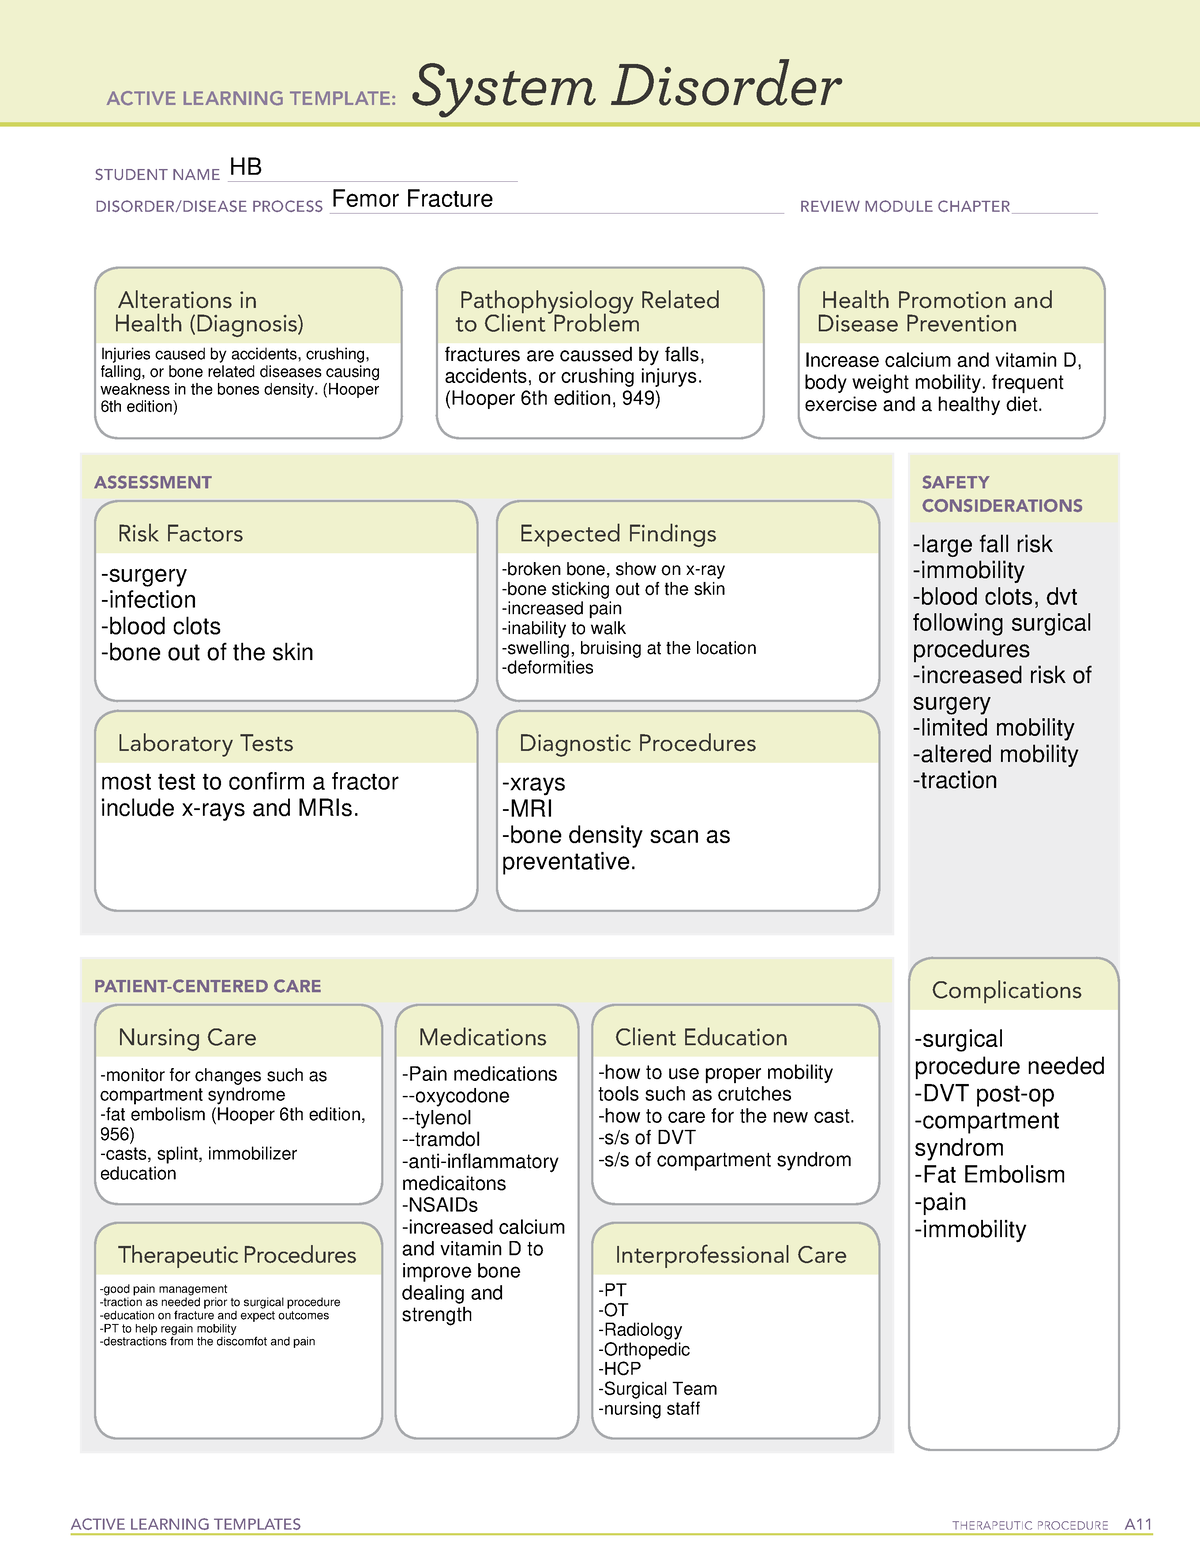 ati-systems-disorder-fracture-template-active-learning-templates-therapeutic-procedure-a